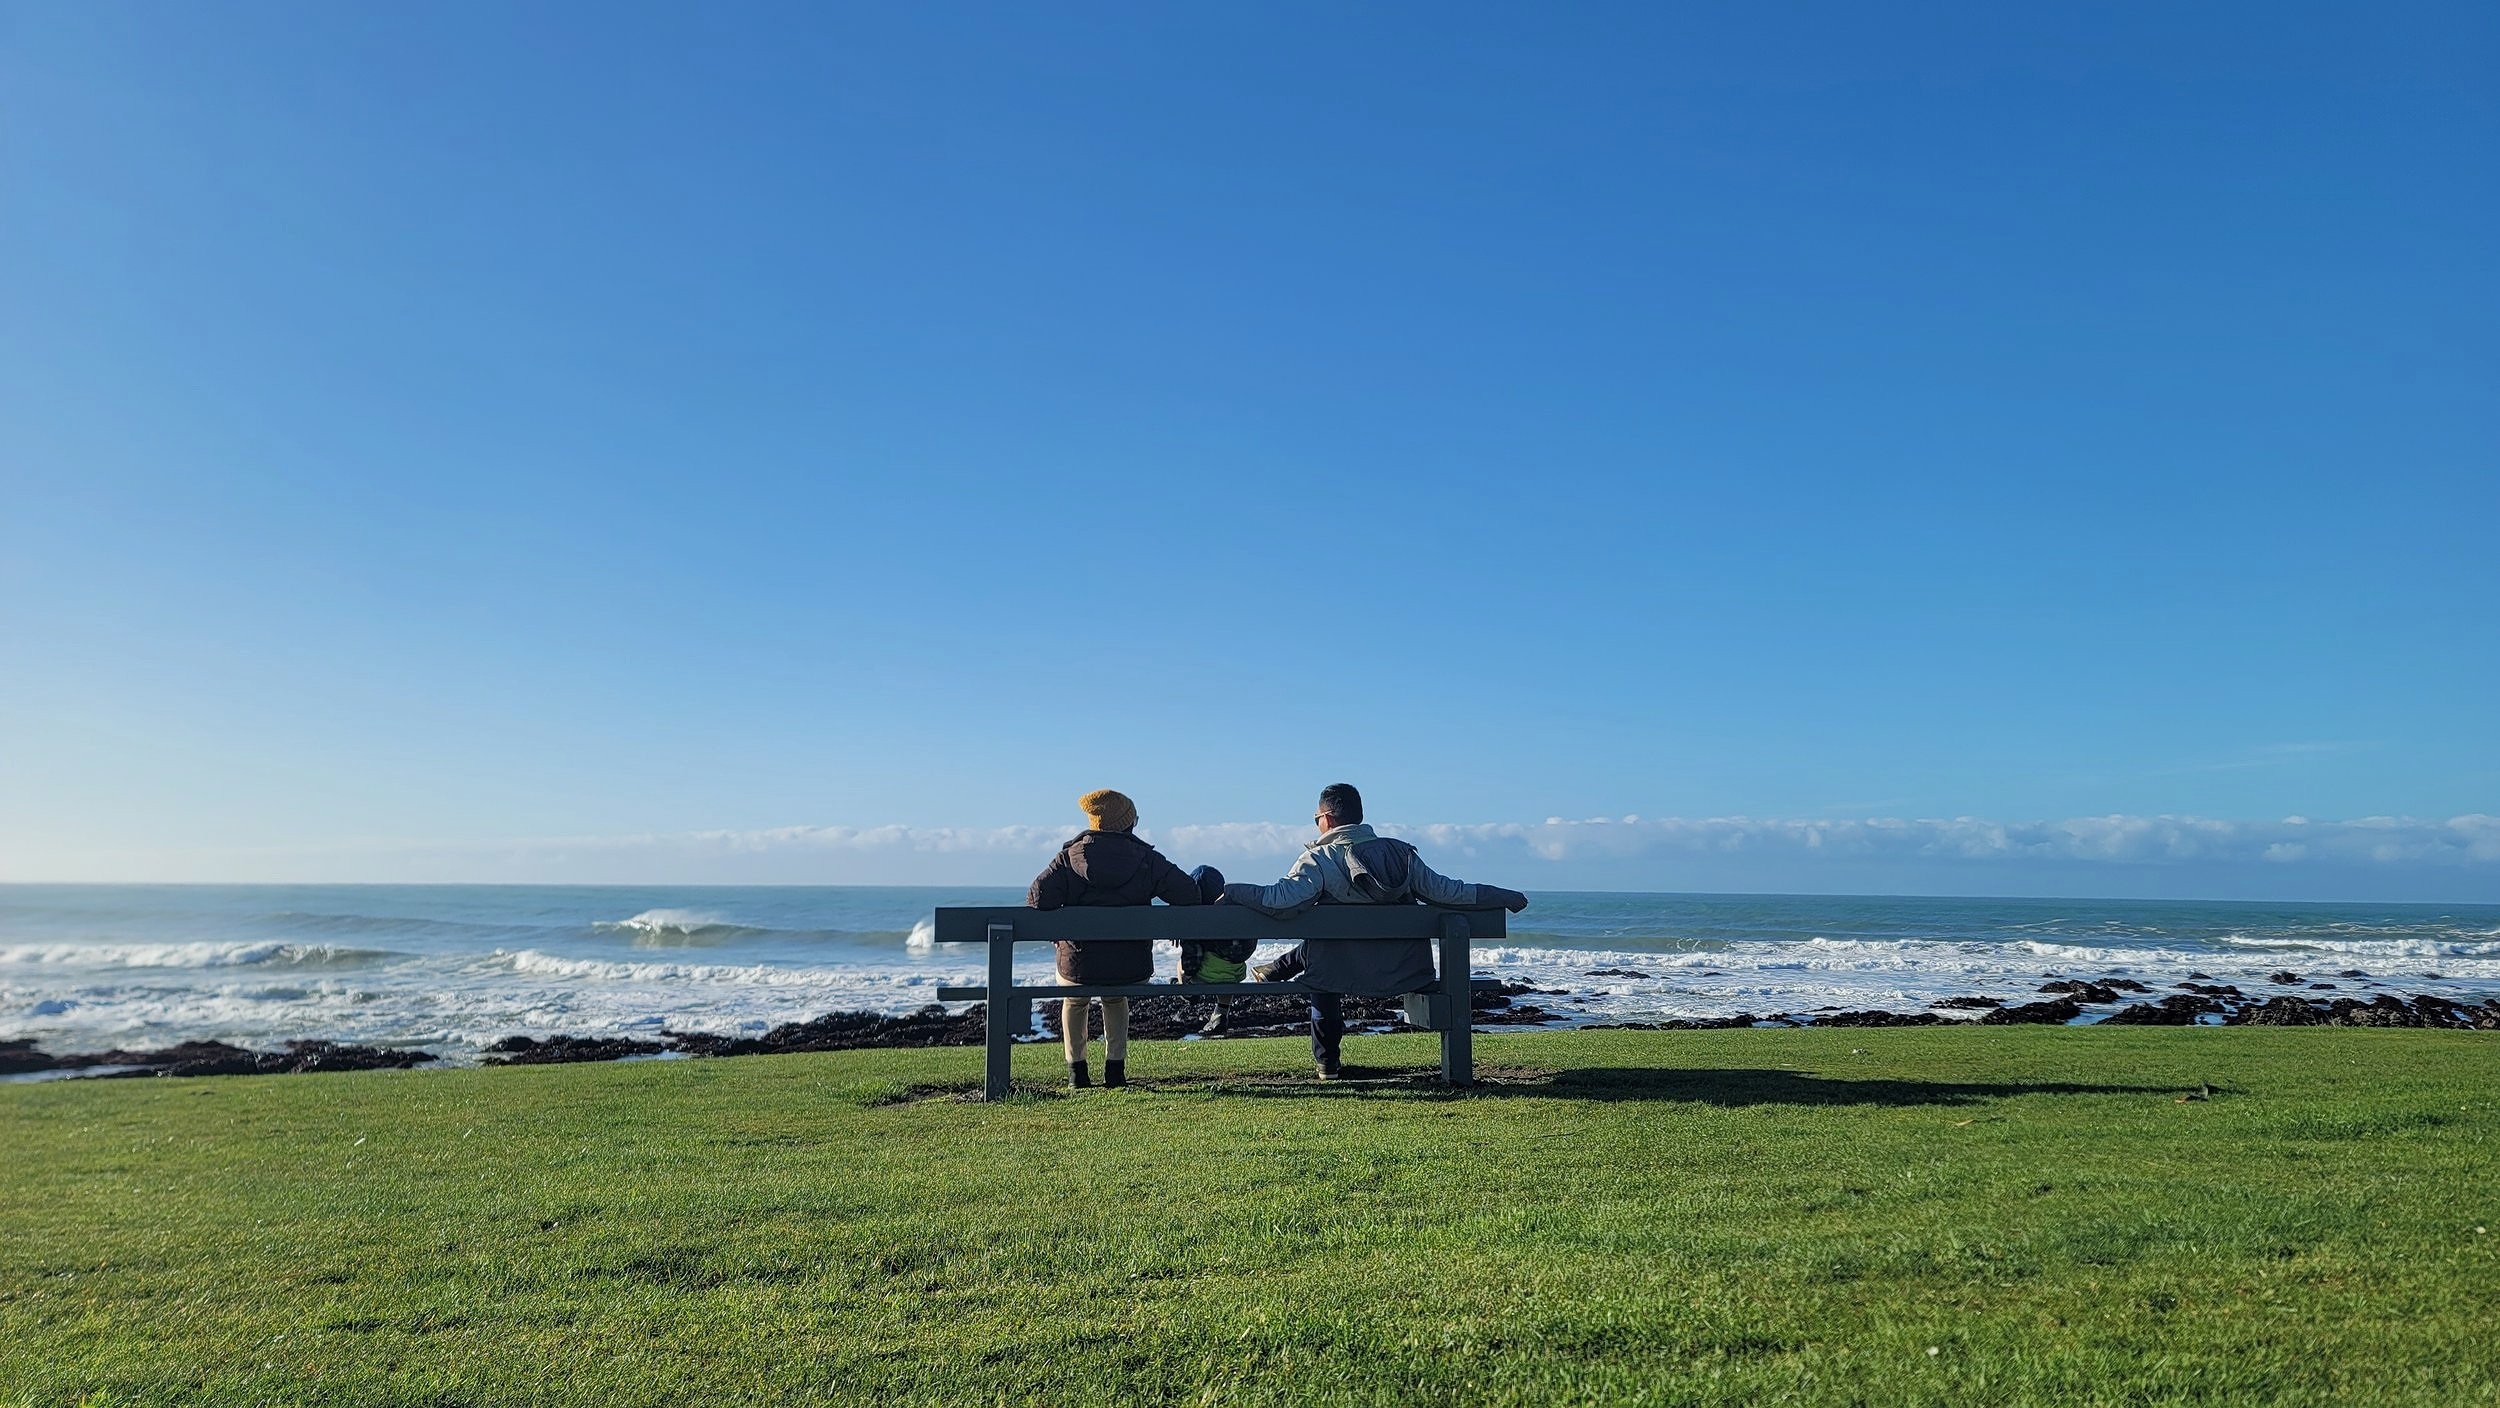  We were driving along the coast from Mout Cook to Christchurch when we came across this look-out point. It was an unbelievable sight across the wide ocean and we had the entire beach to ourselves. So of course we had to run around in the sand and dr